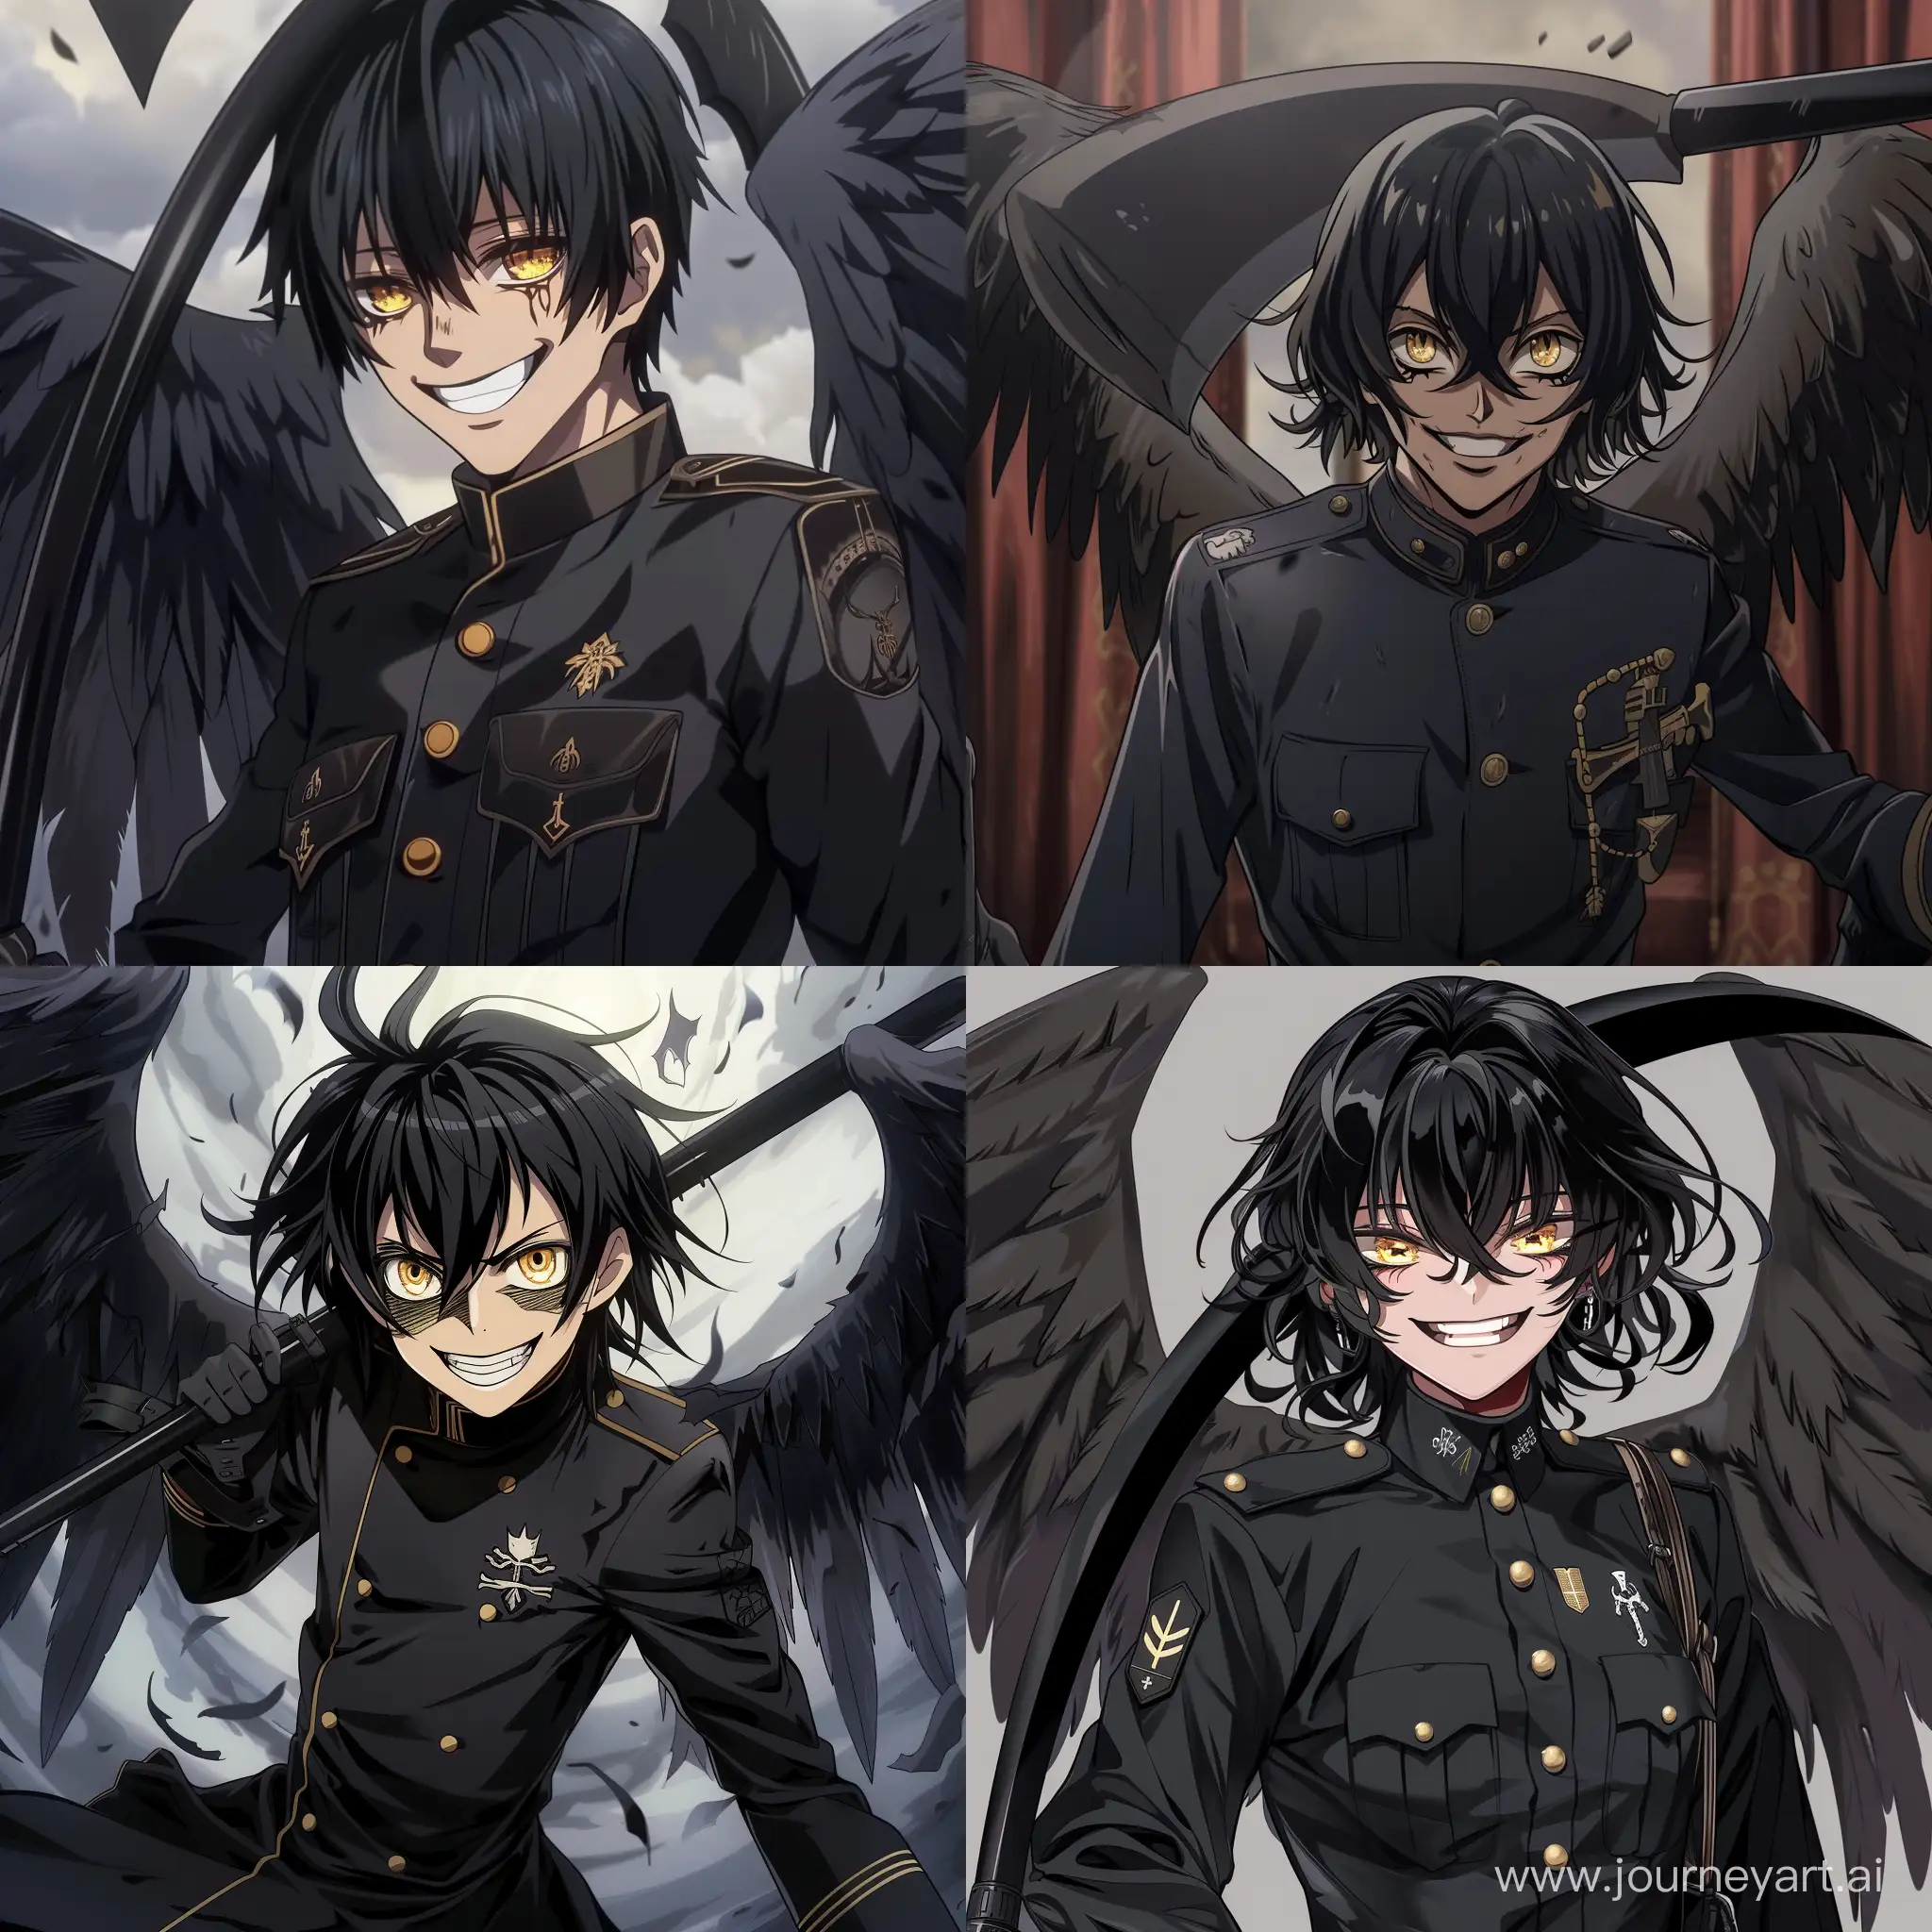 A smiling angel of death with black hair and golden eyes, with black scythe, in black uniform in anime style